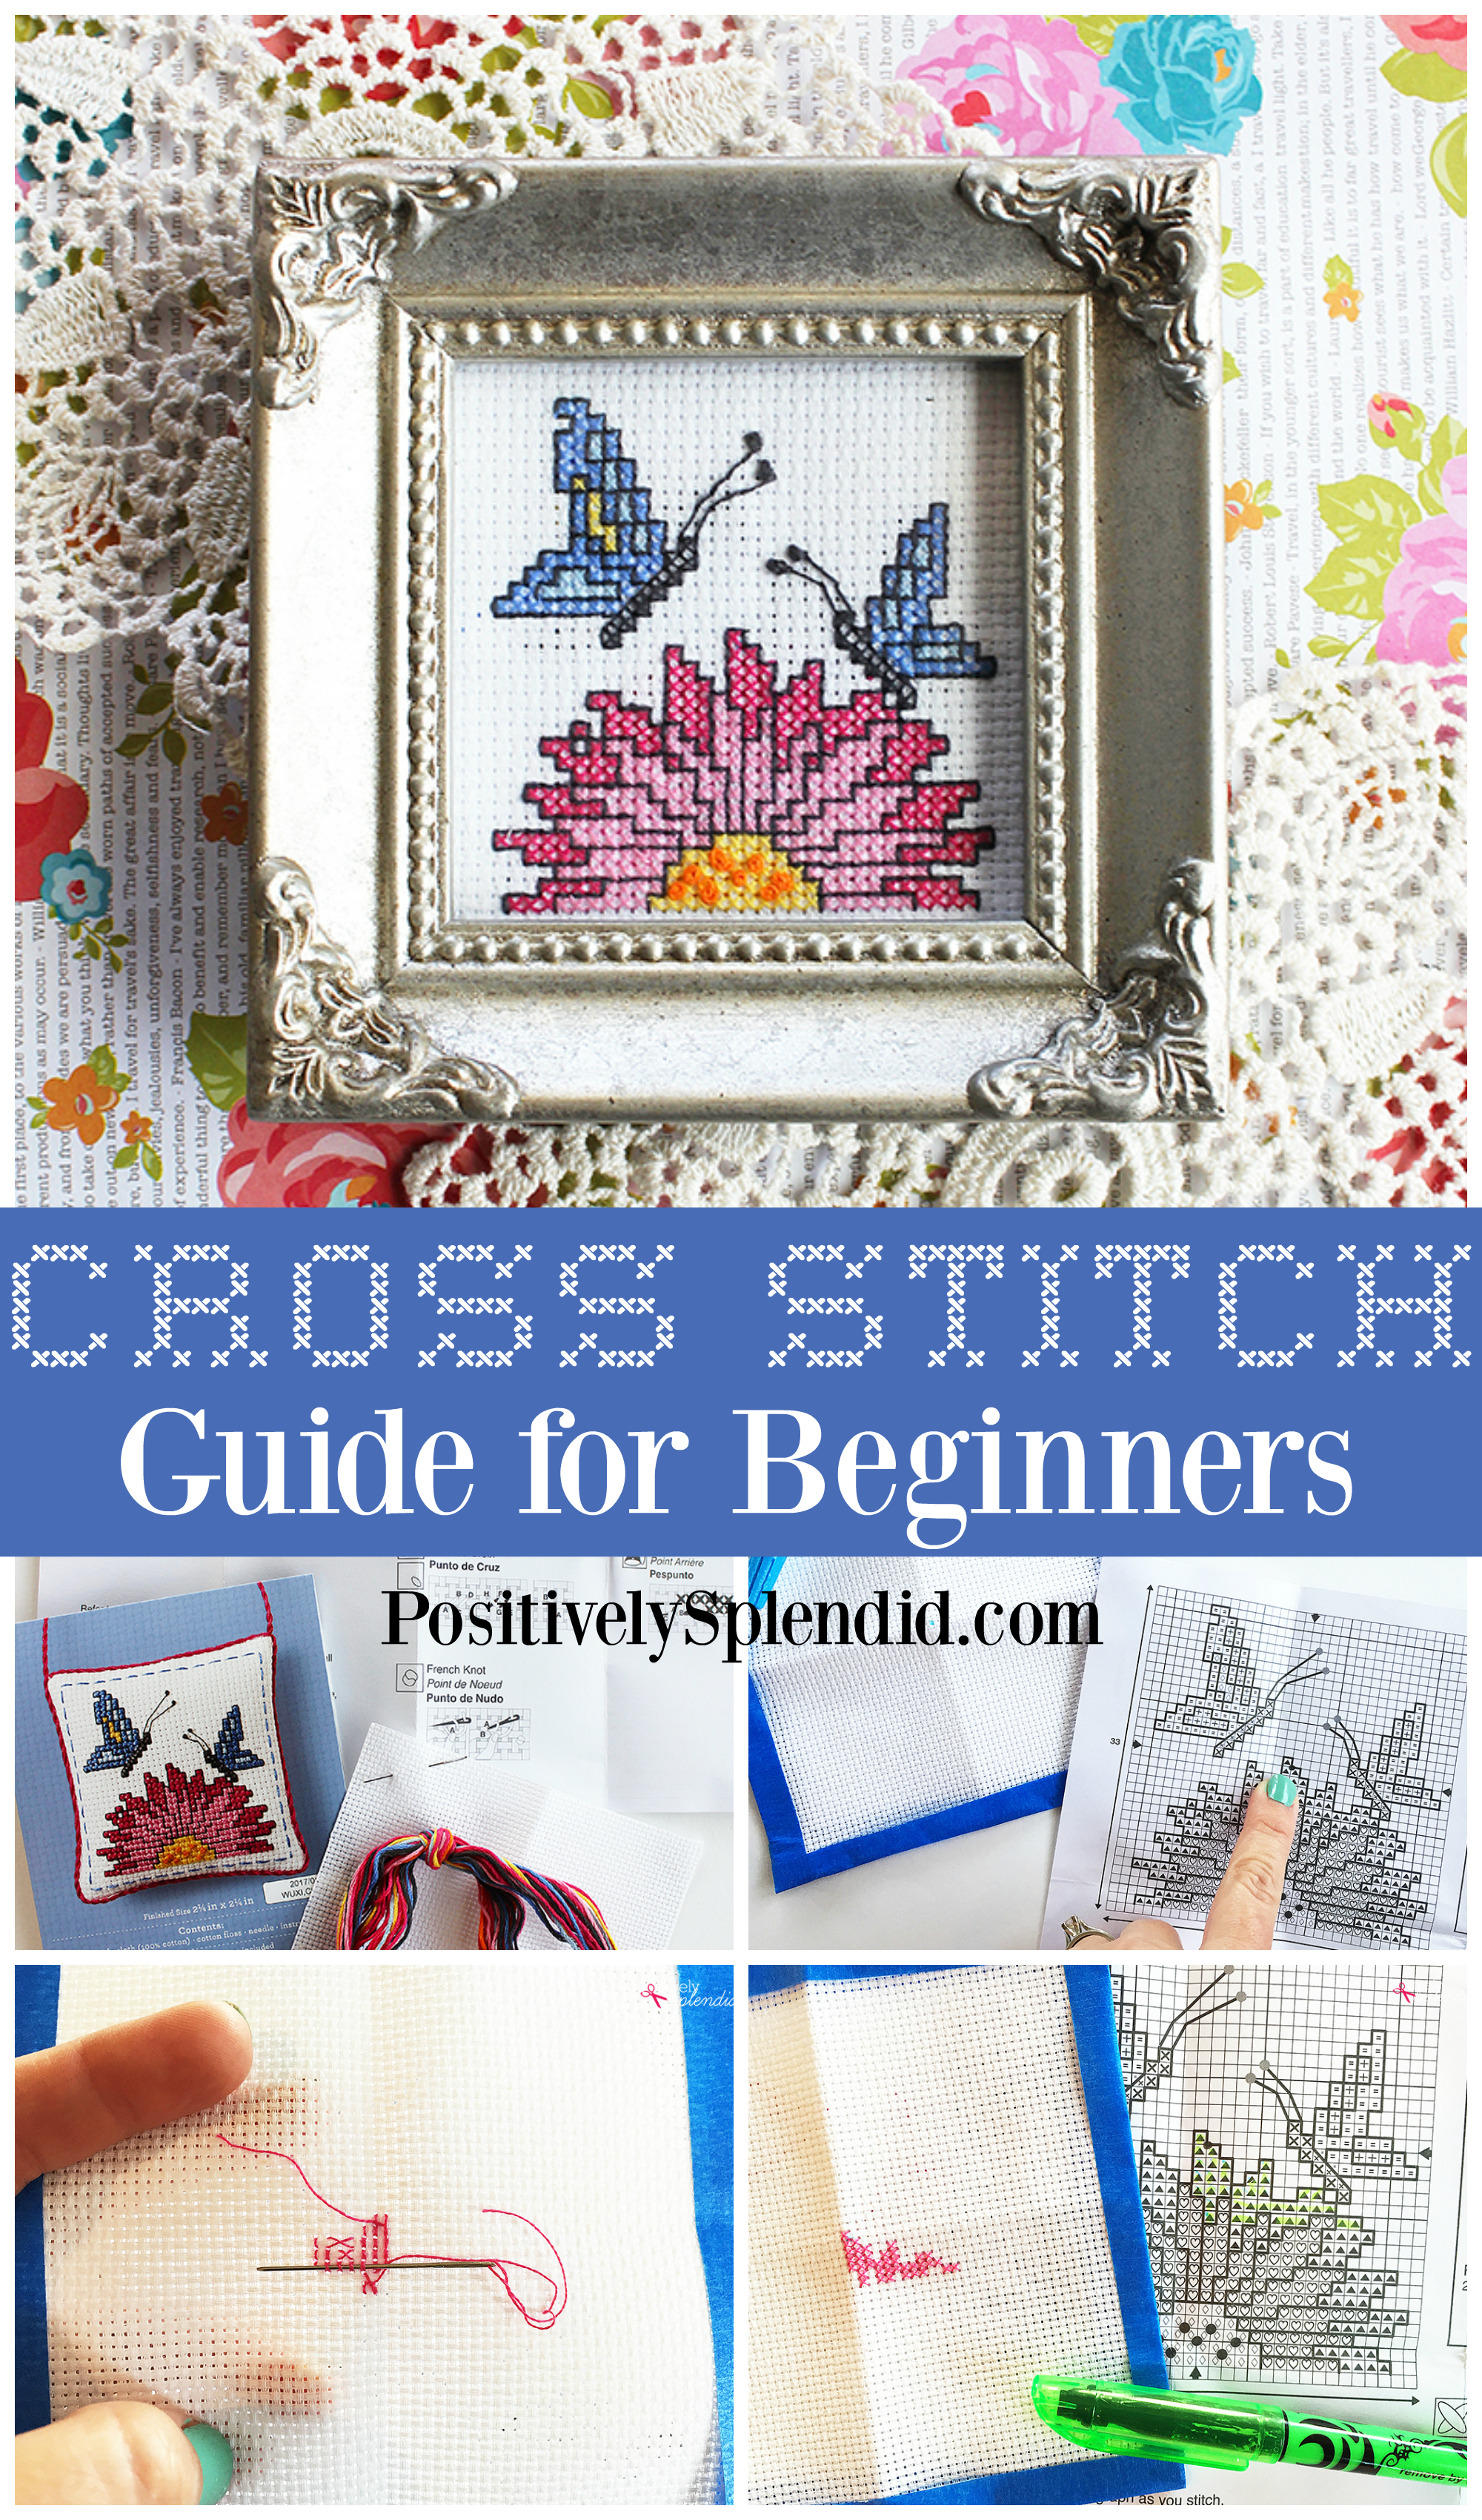 10 Beginner Cross Stitch Tips - These are great tips for getting started with counted cross stitch! 